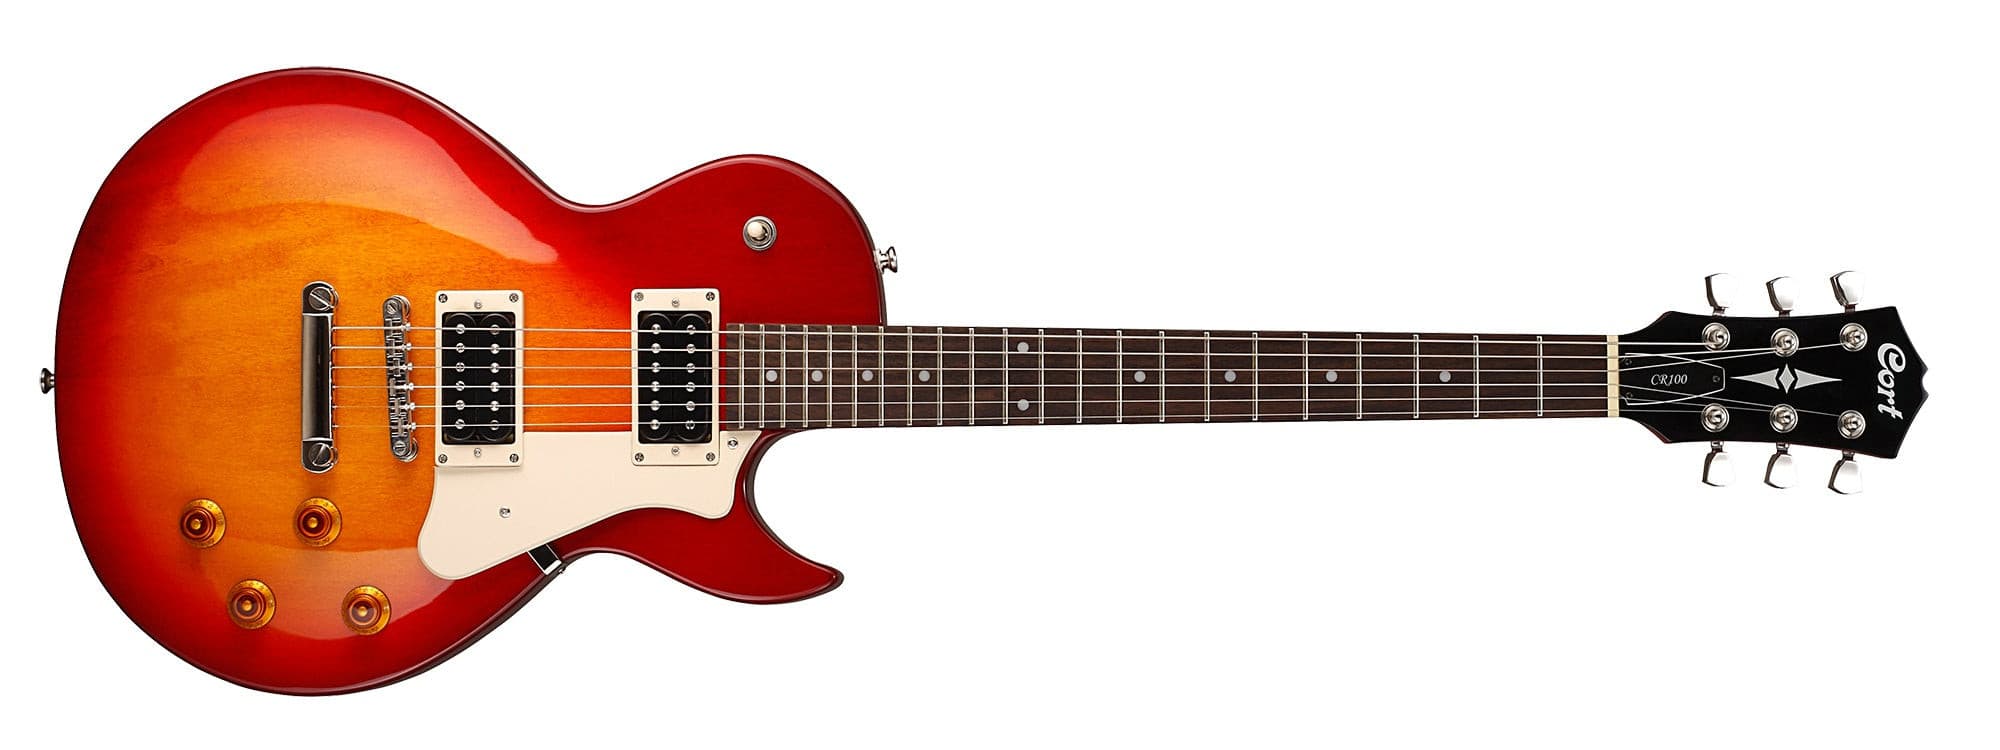 Cort CR100 Cherry Red Sunburst, Electric Guitar for sale at Richards Guitars.